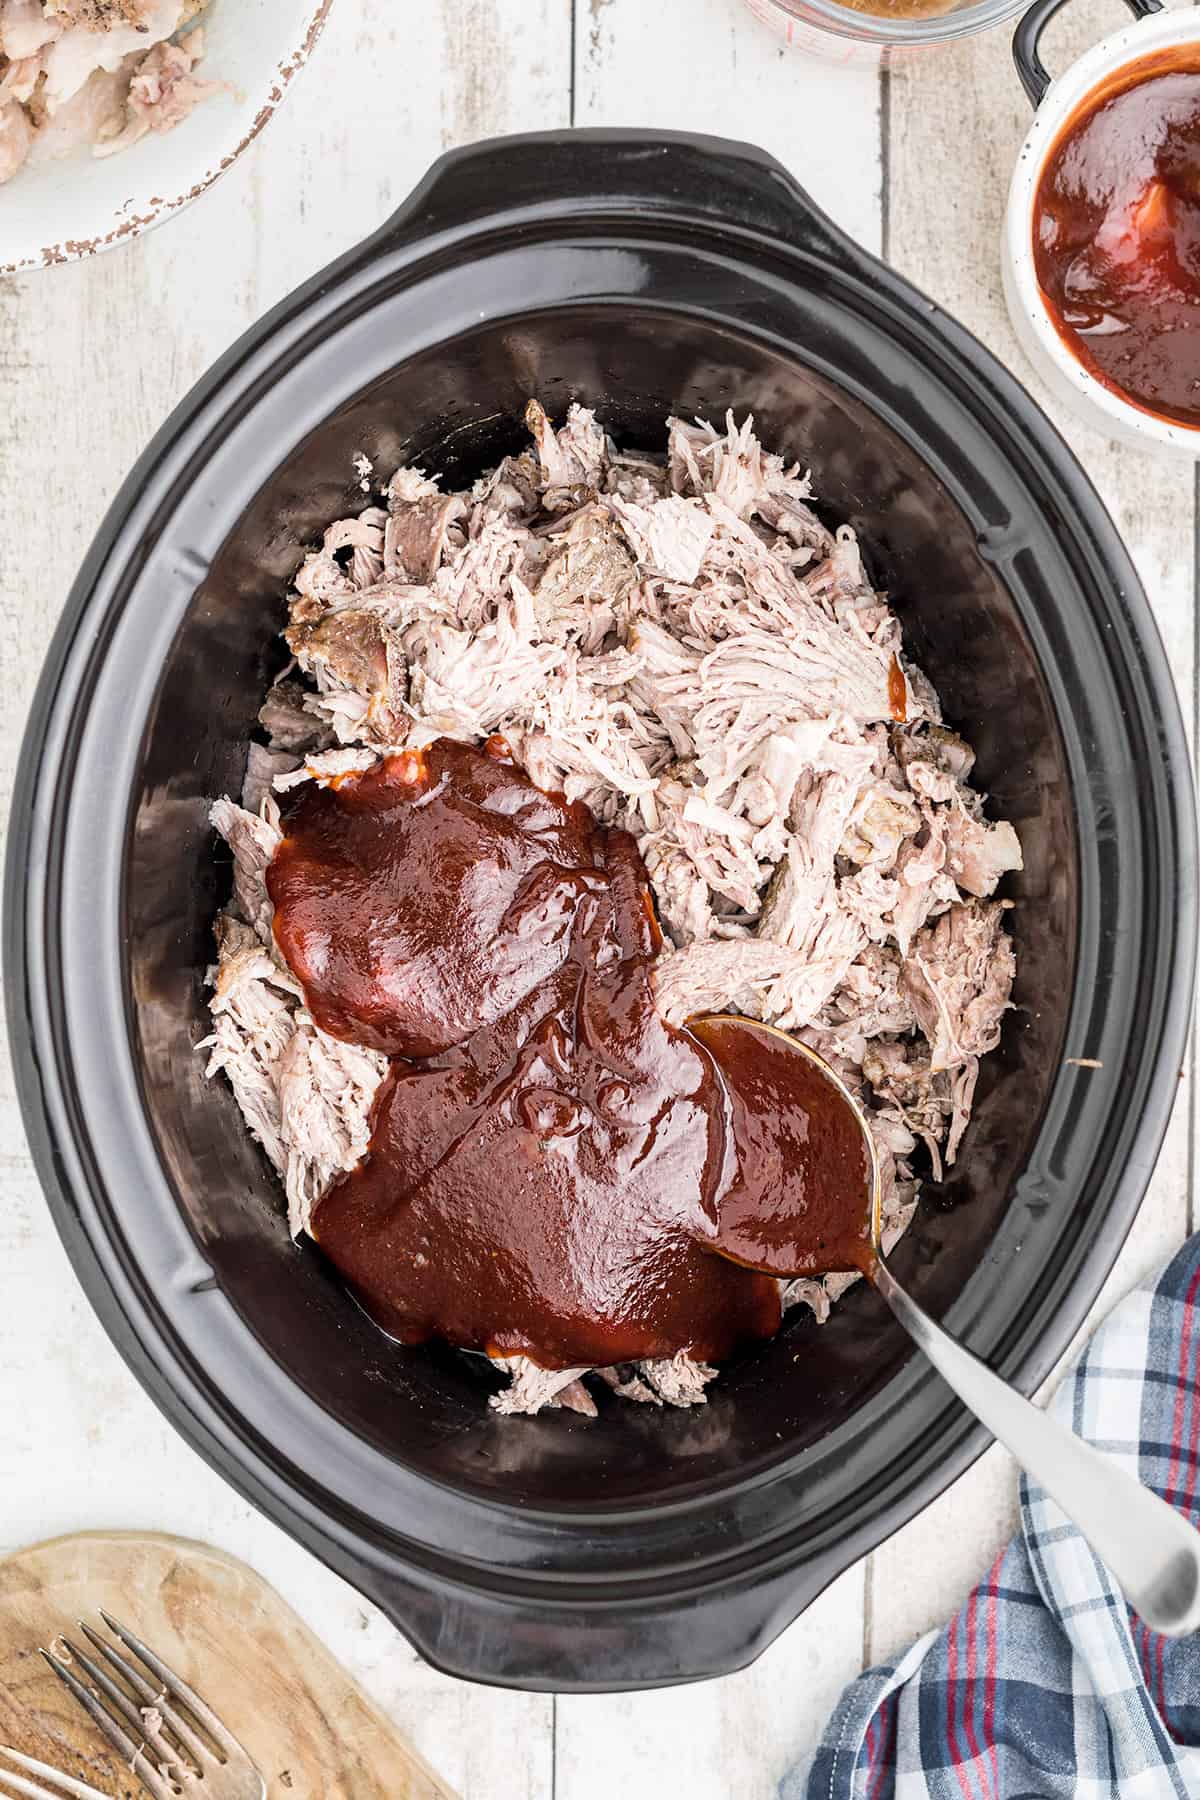 Barbecue sauce and cooking juices added to shredded pork in the slow cooker.